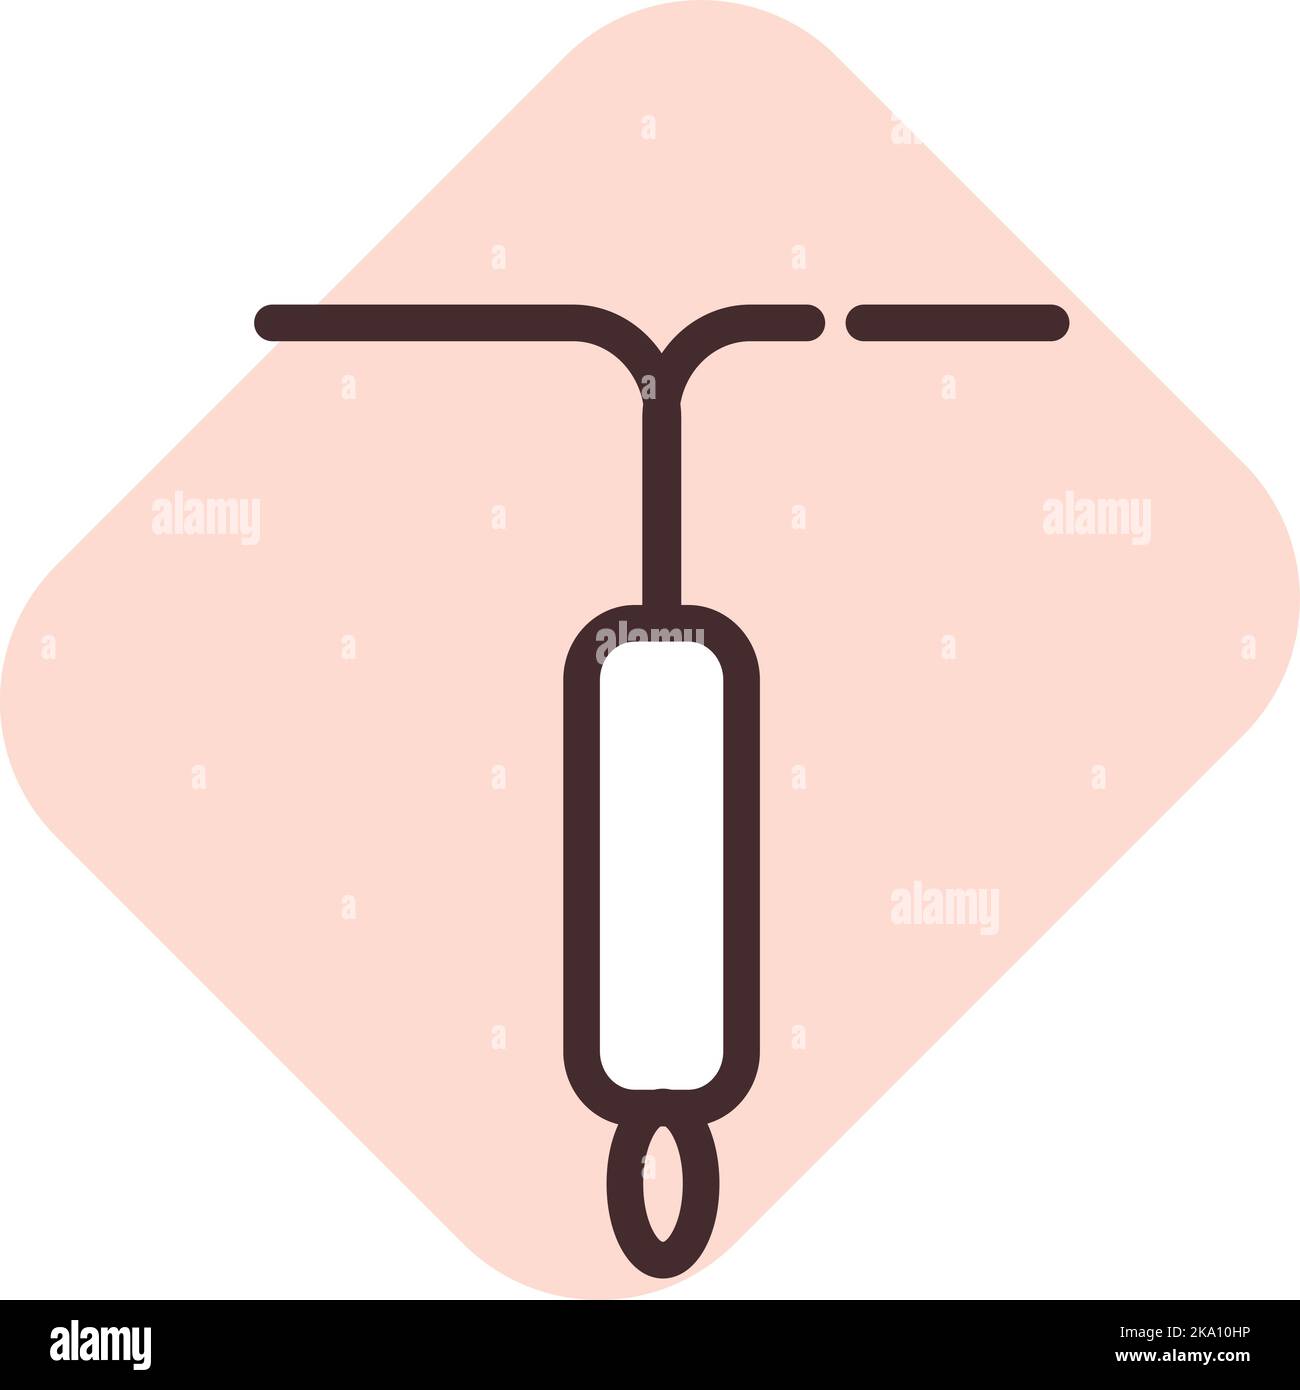 Health contraceptive, illustration or icon, vector on white background. Stock Vector